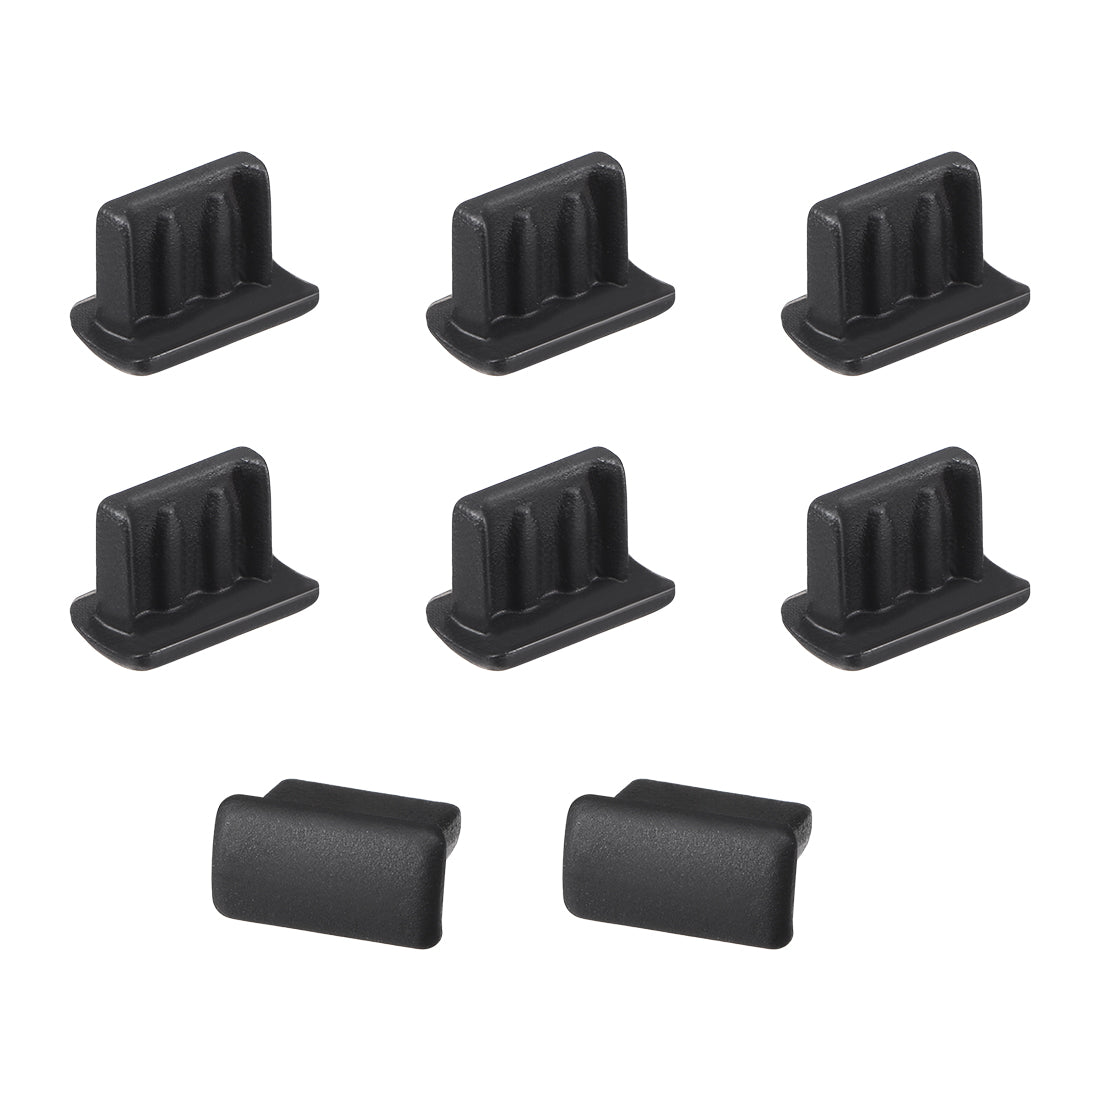 uxcell Uxcell Silicone Mini USB Anti-Dust Stopper Cap Cover Black 10pcs